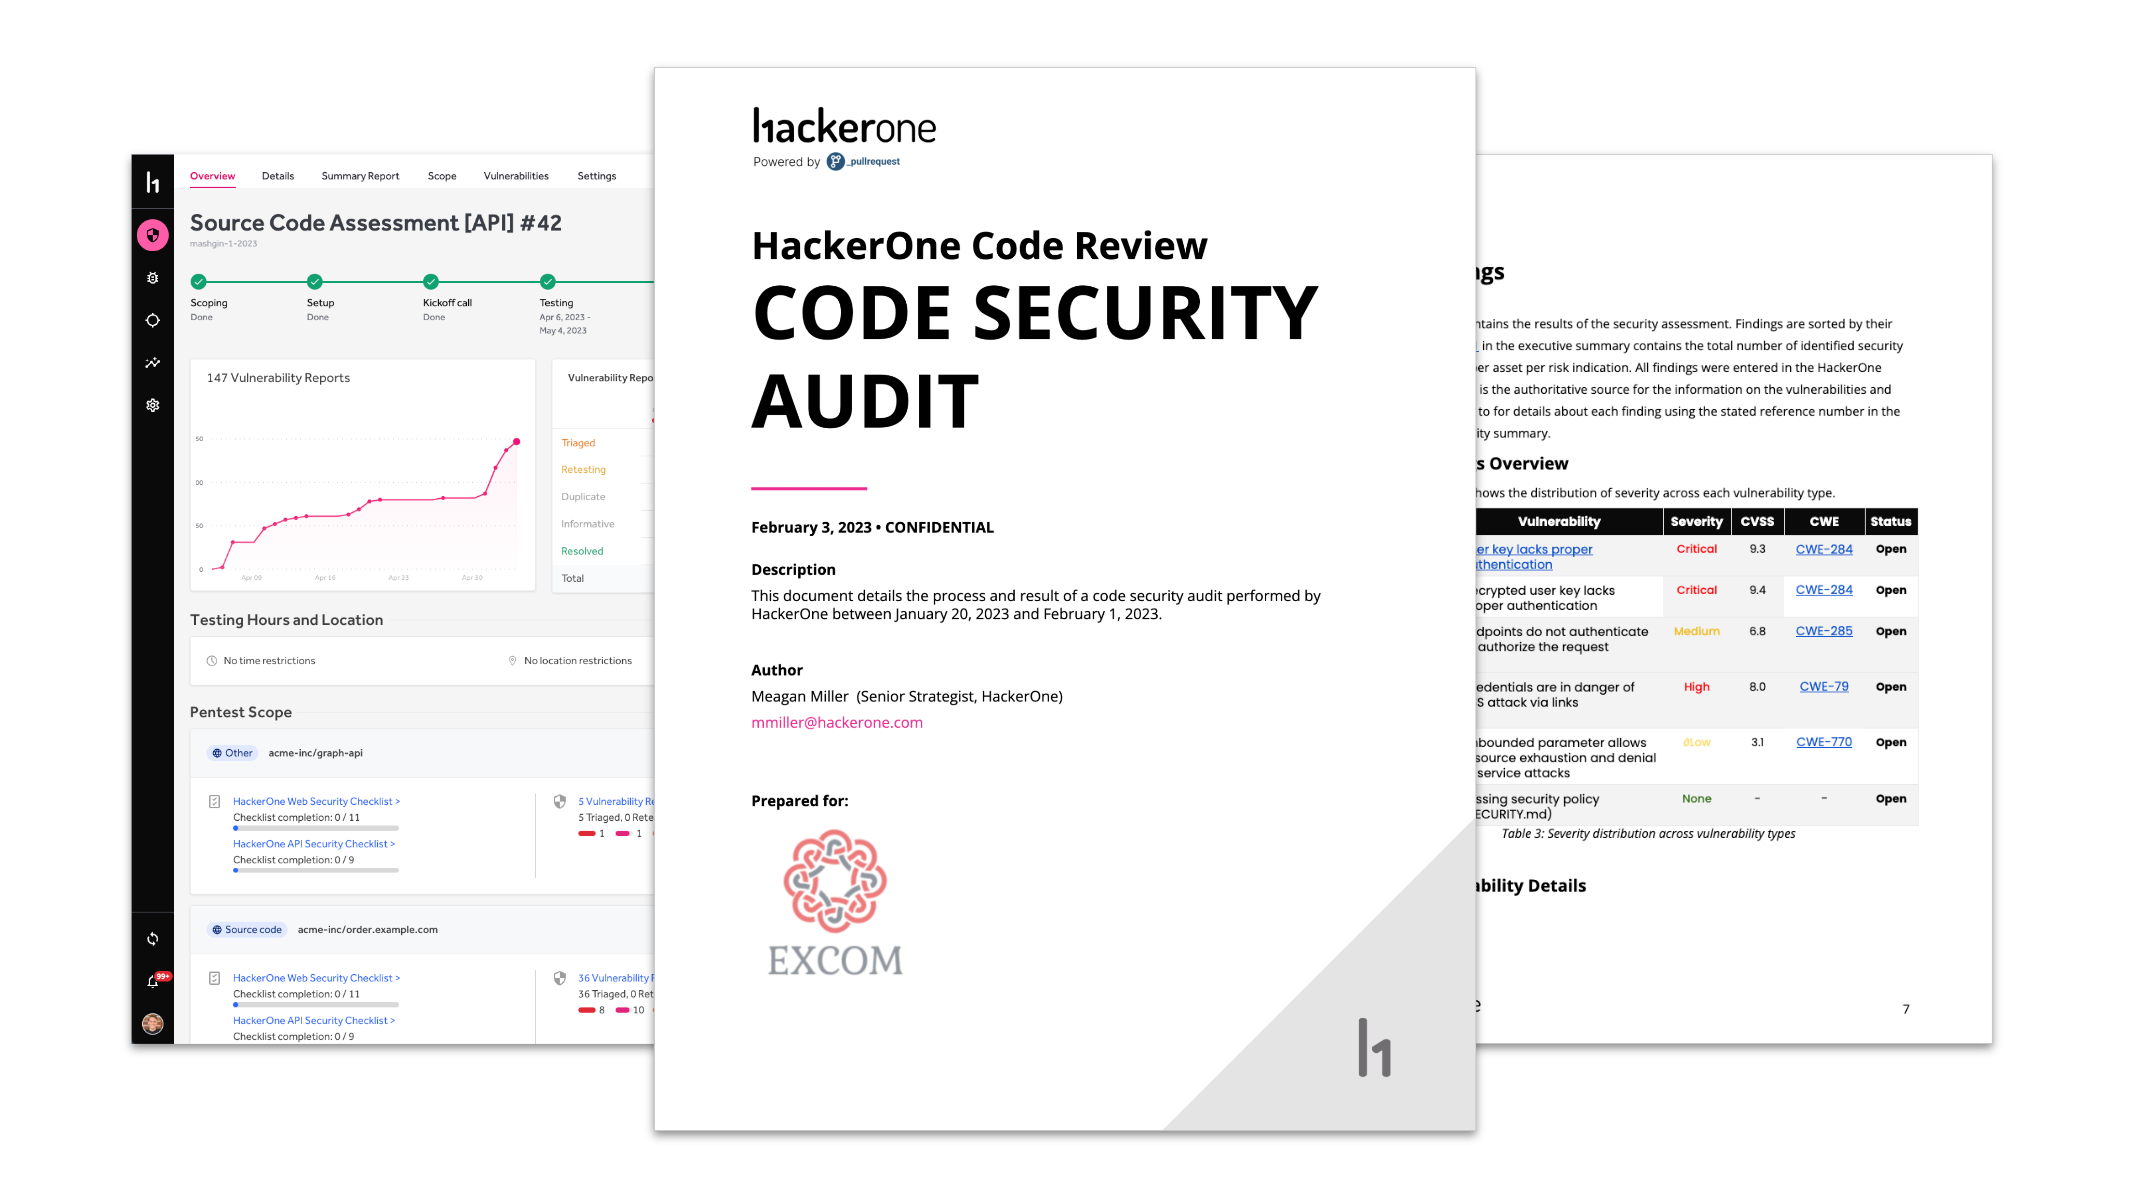 Code Security Audit screen and documents